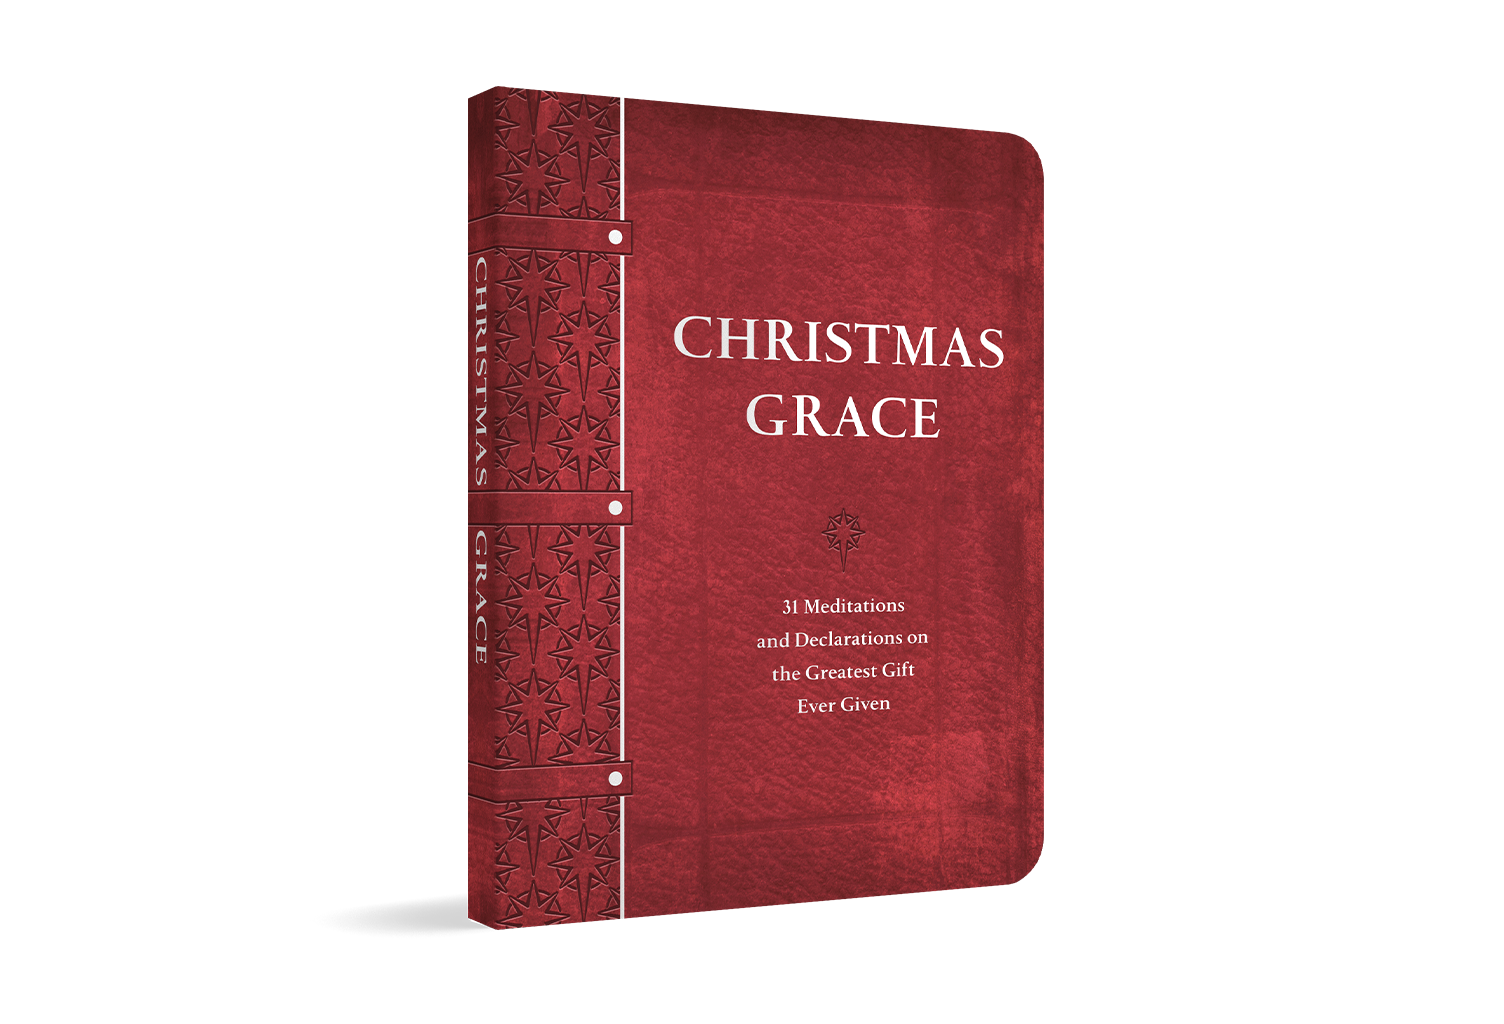 Christmas Grace by David Holland on TBN